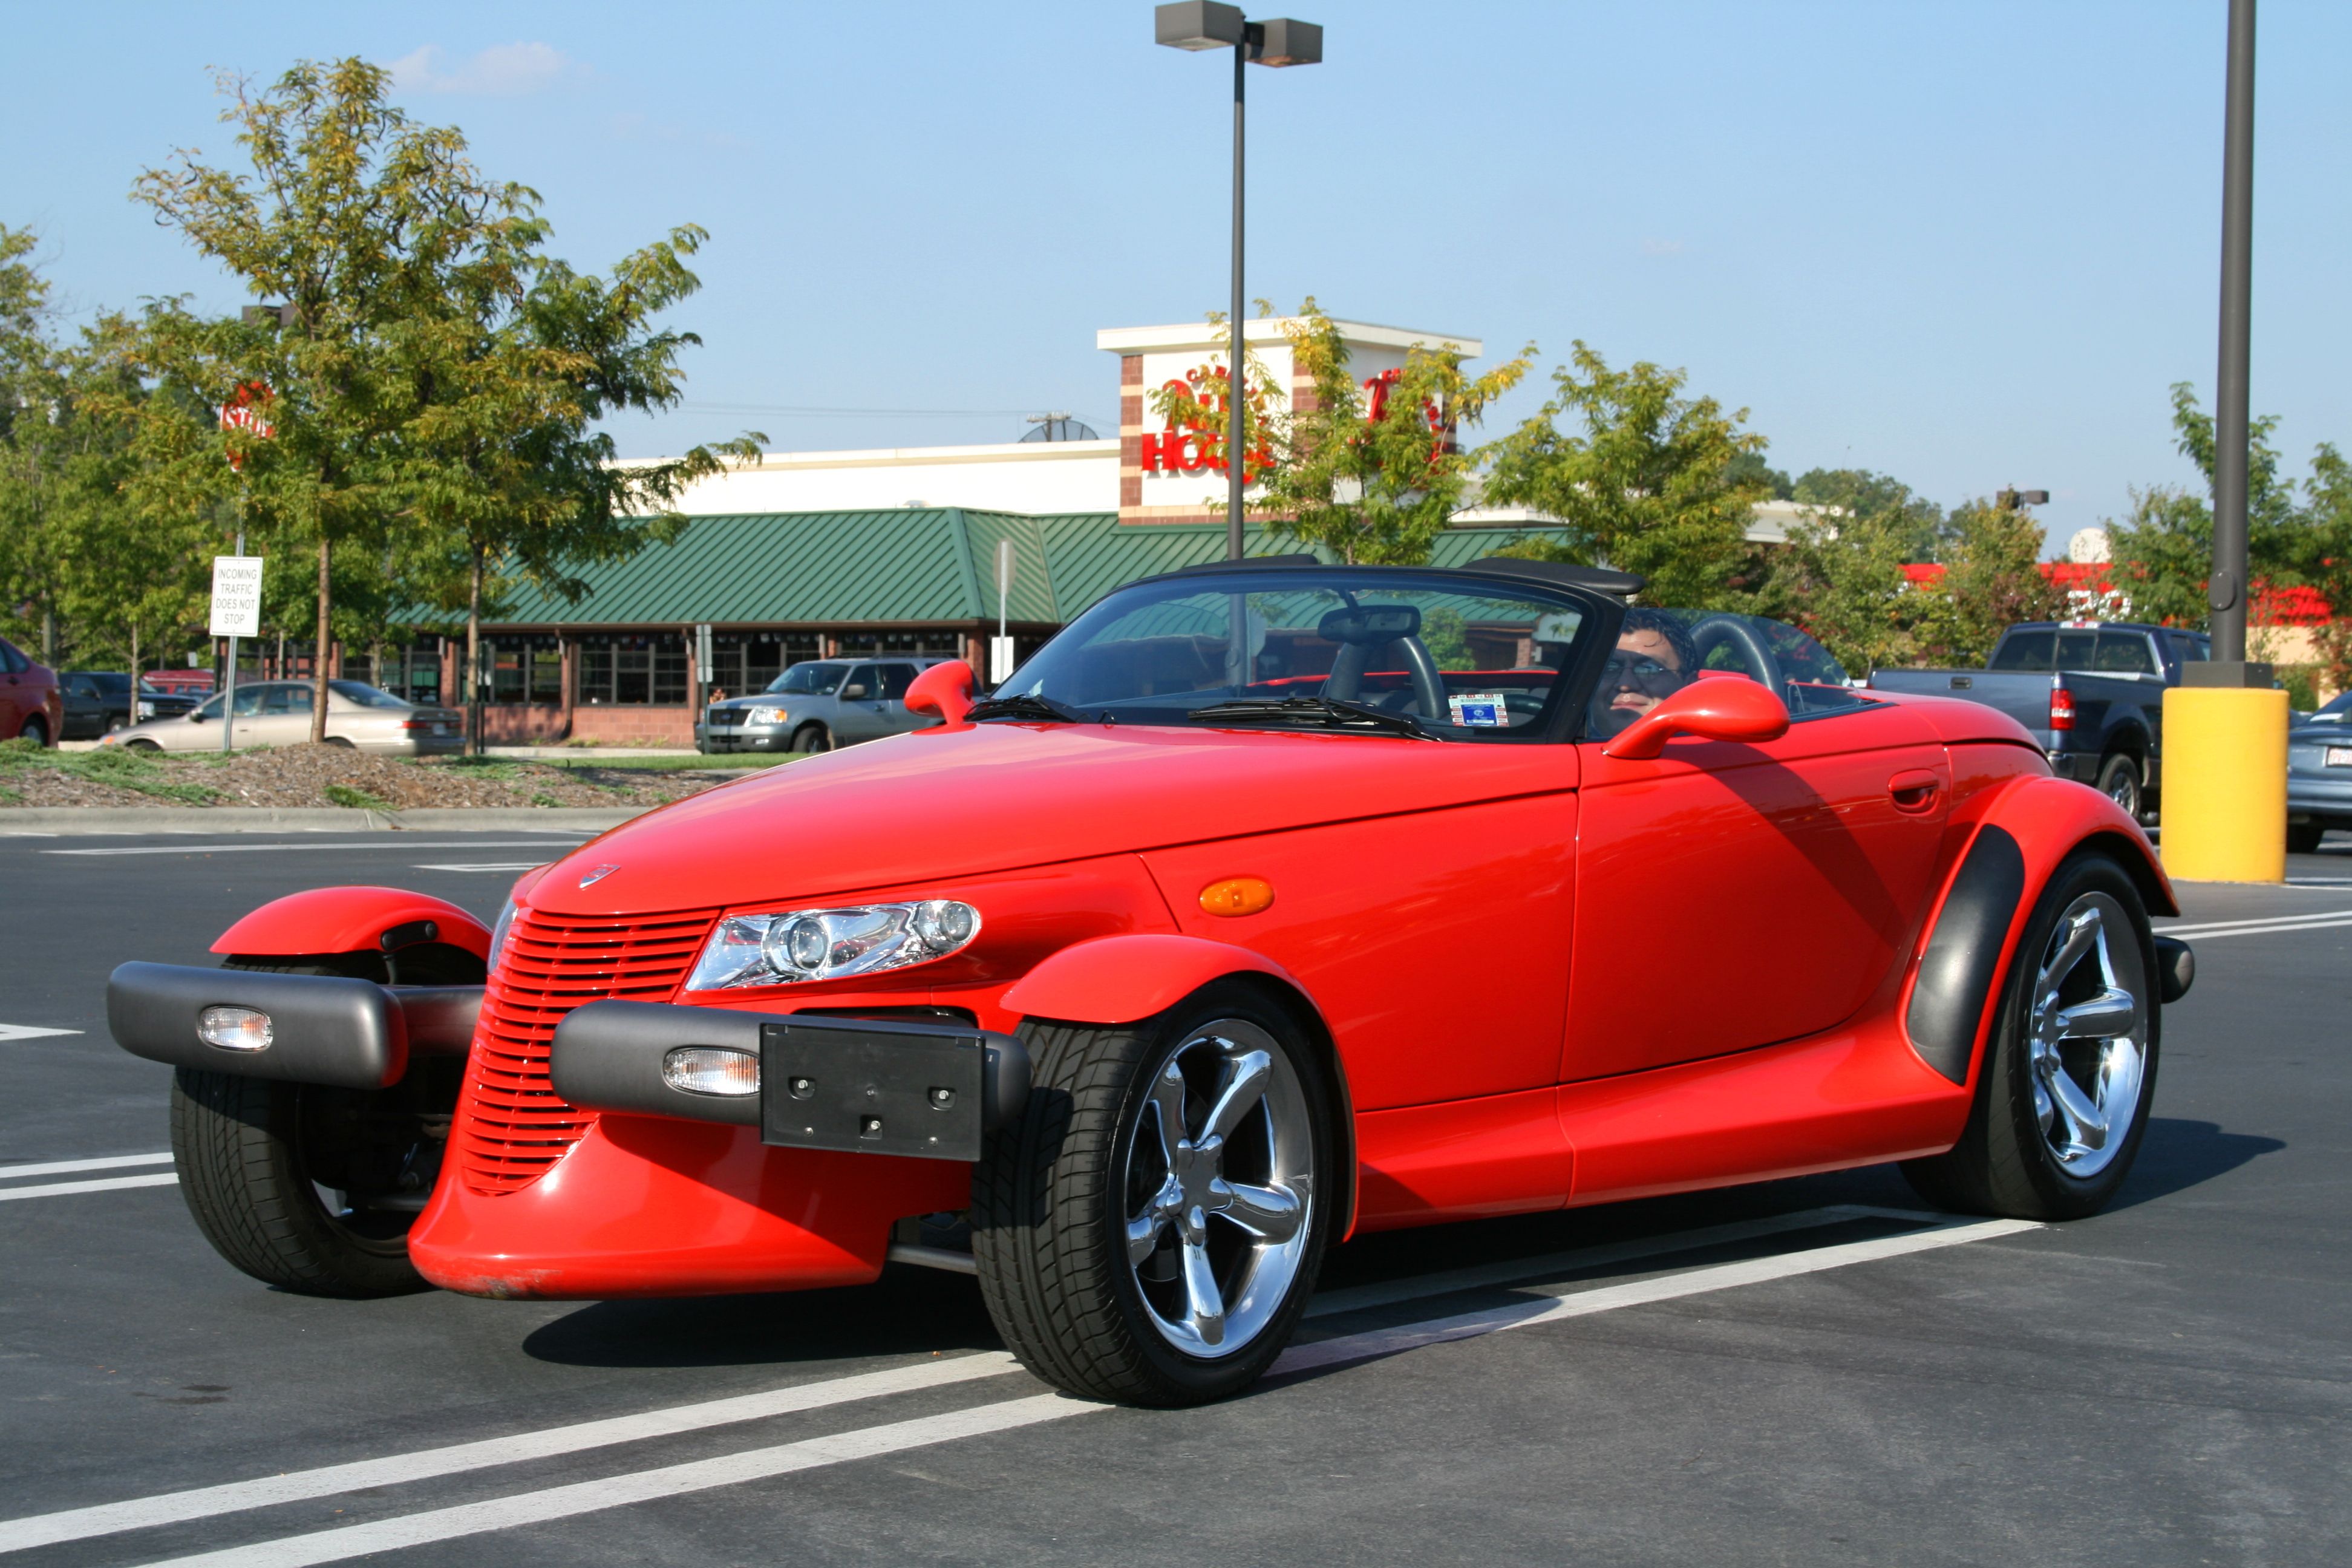 Plymouth Prowler on the road